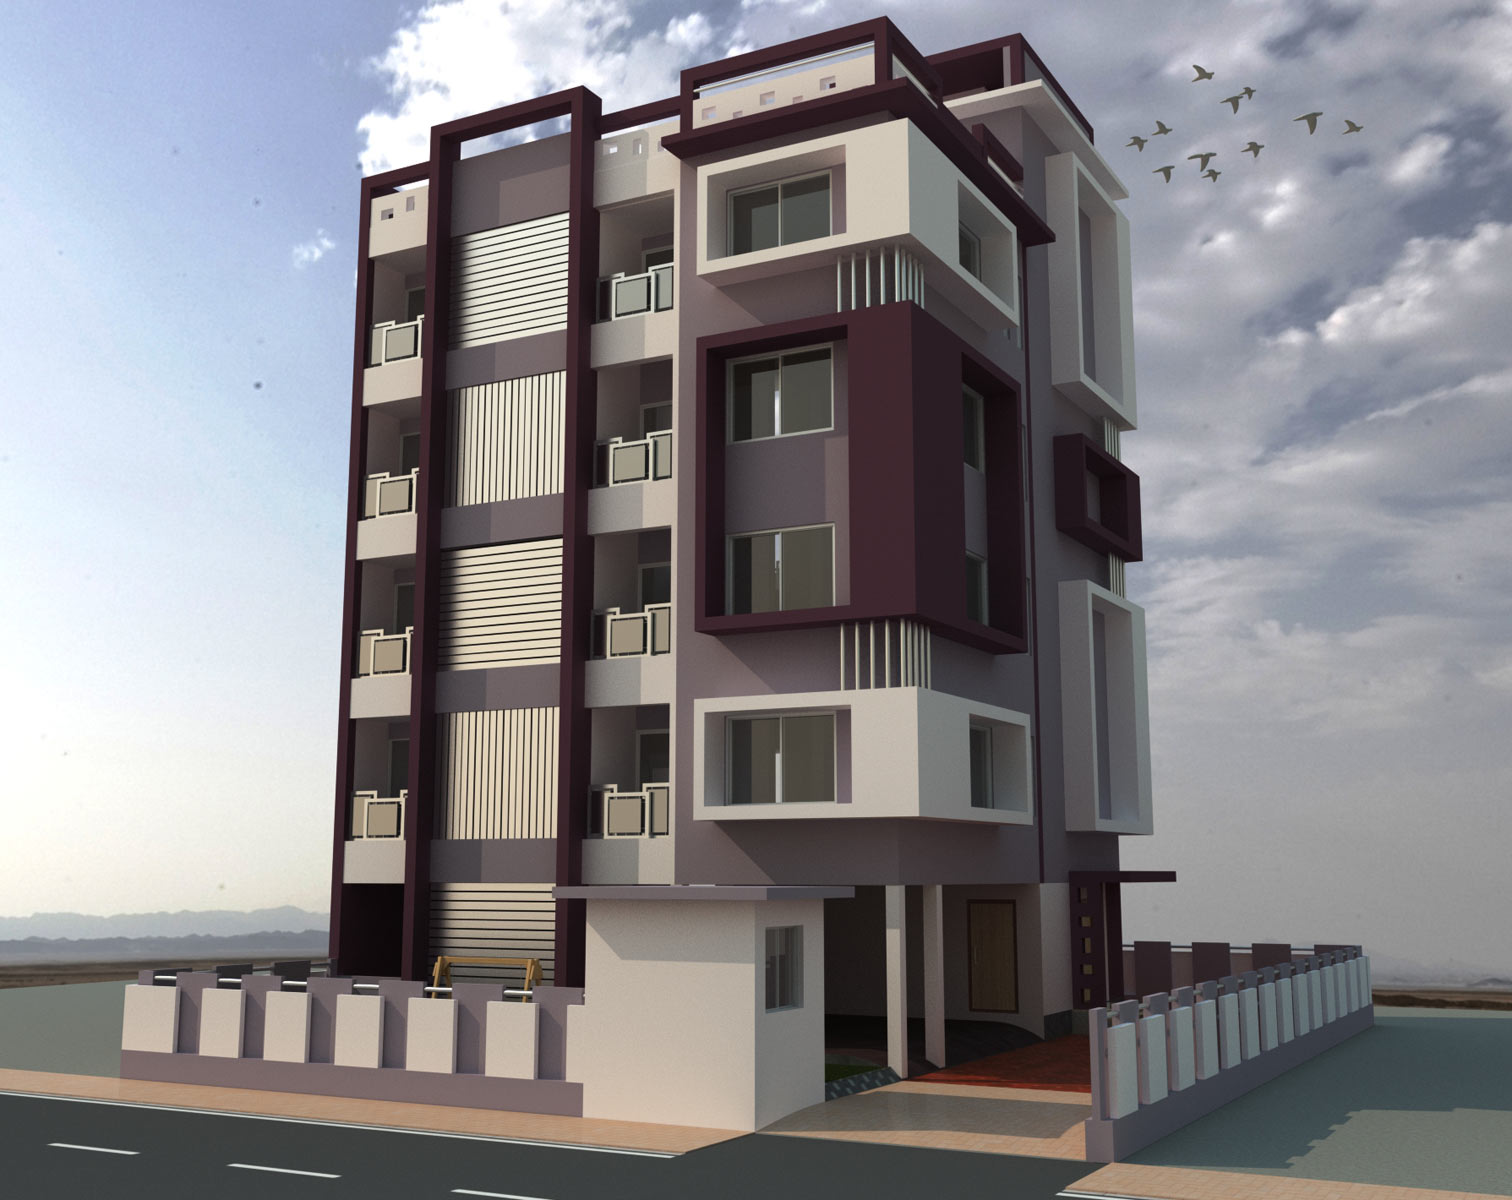 MULTI STORIED FLATS AT 70 SARATHI ROW HOUSE FOR ORIENTAL BANK OF COMMERCE